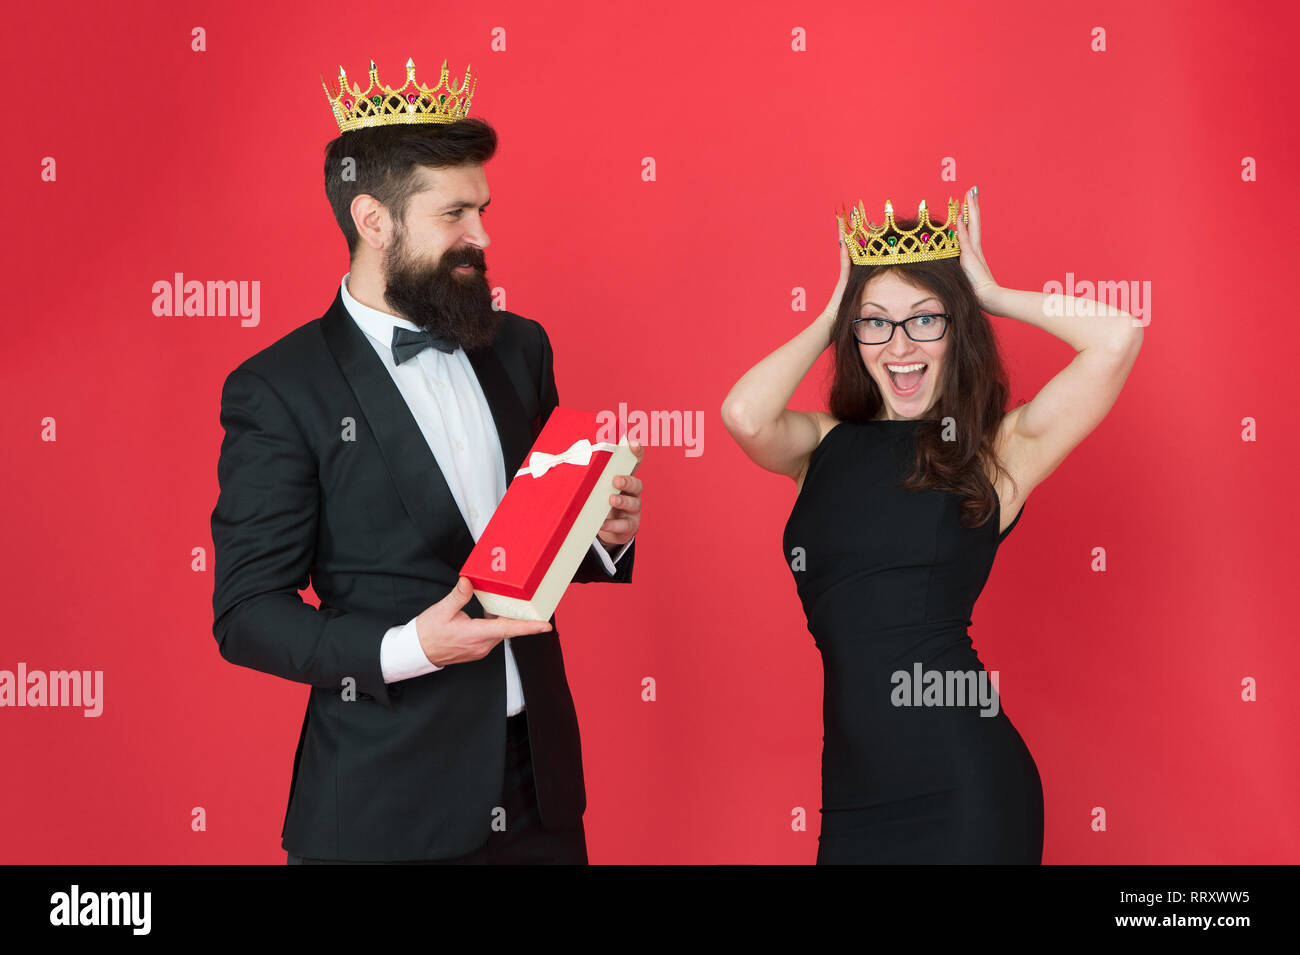 royal couple in love. date. business success. business fashion. anniversary party gift. Formal business couple. man in tuxedo and woman. Bearded man and happy woman in crown. Successful professional. Stock Photo